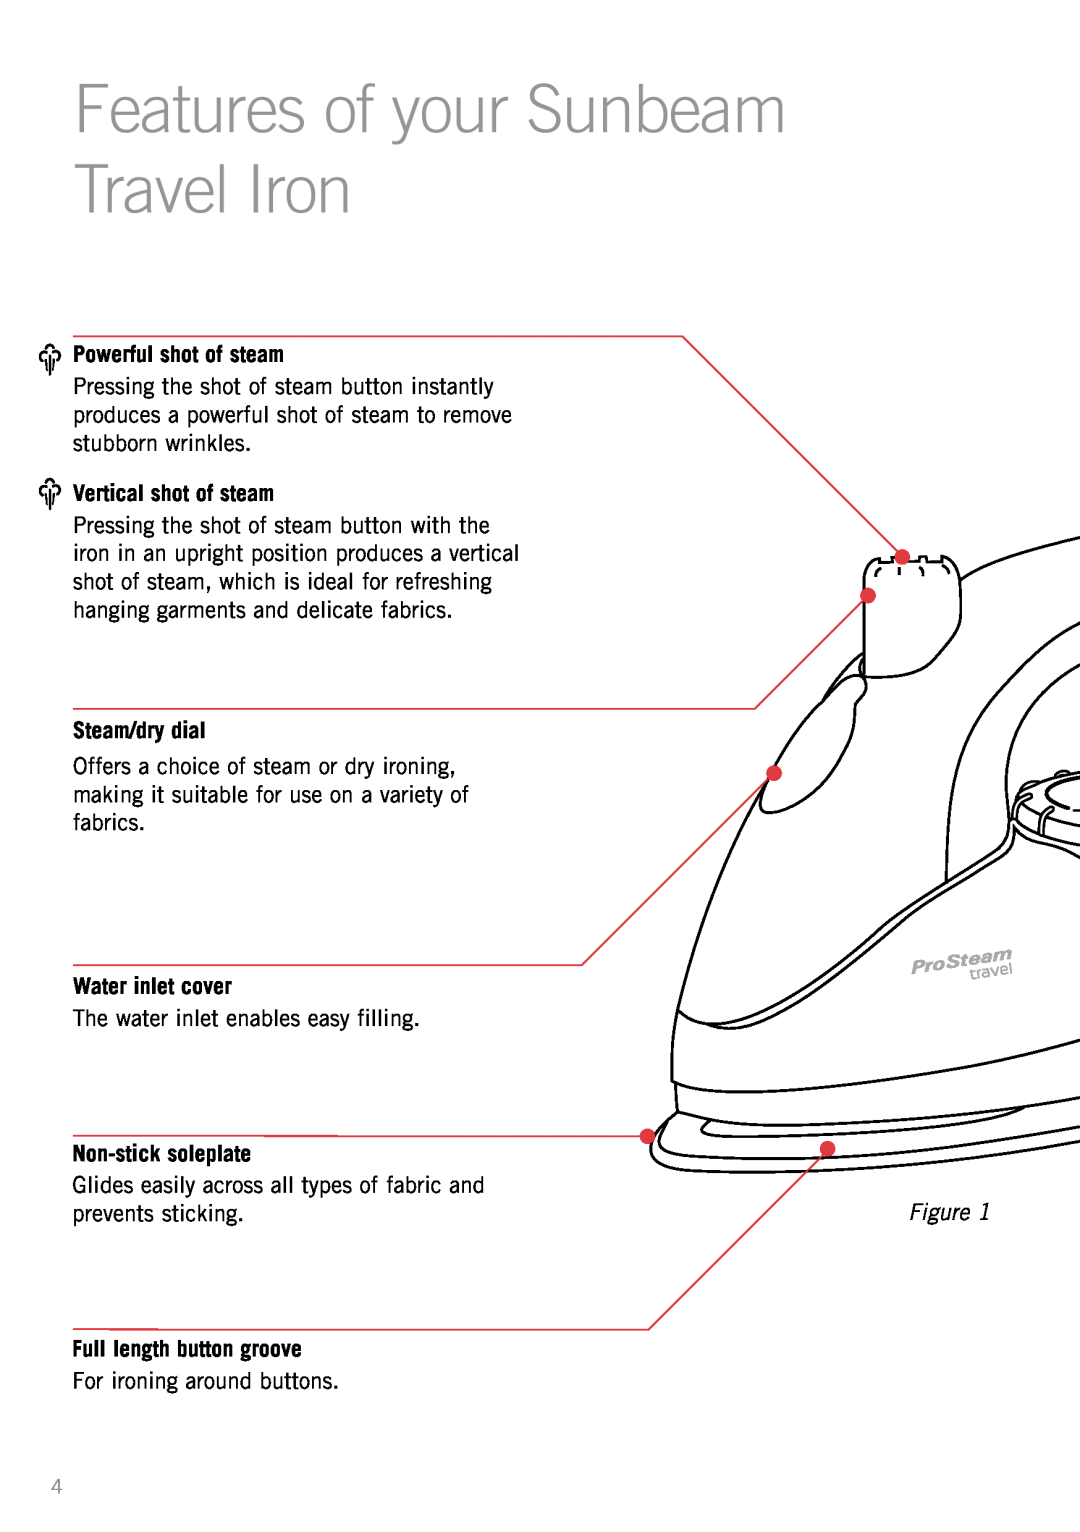 Sunbeam SR2300 manual Features of your Sunbeam Travel Iron, Powerful shot of steam, Vertical shot of steam, Steam/dry dial 